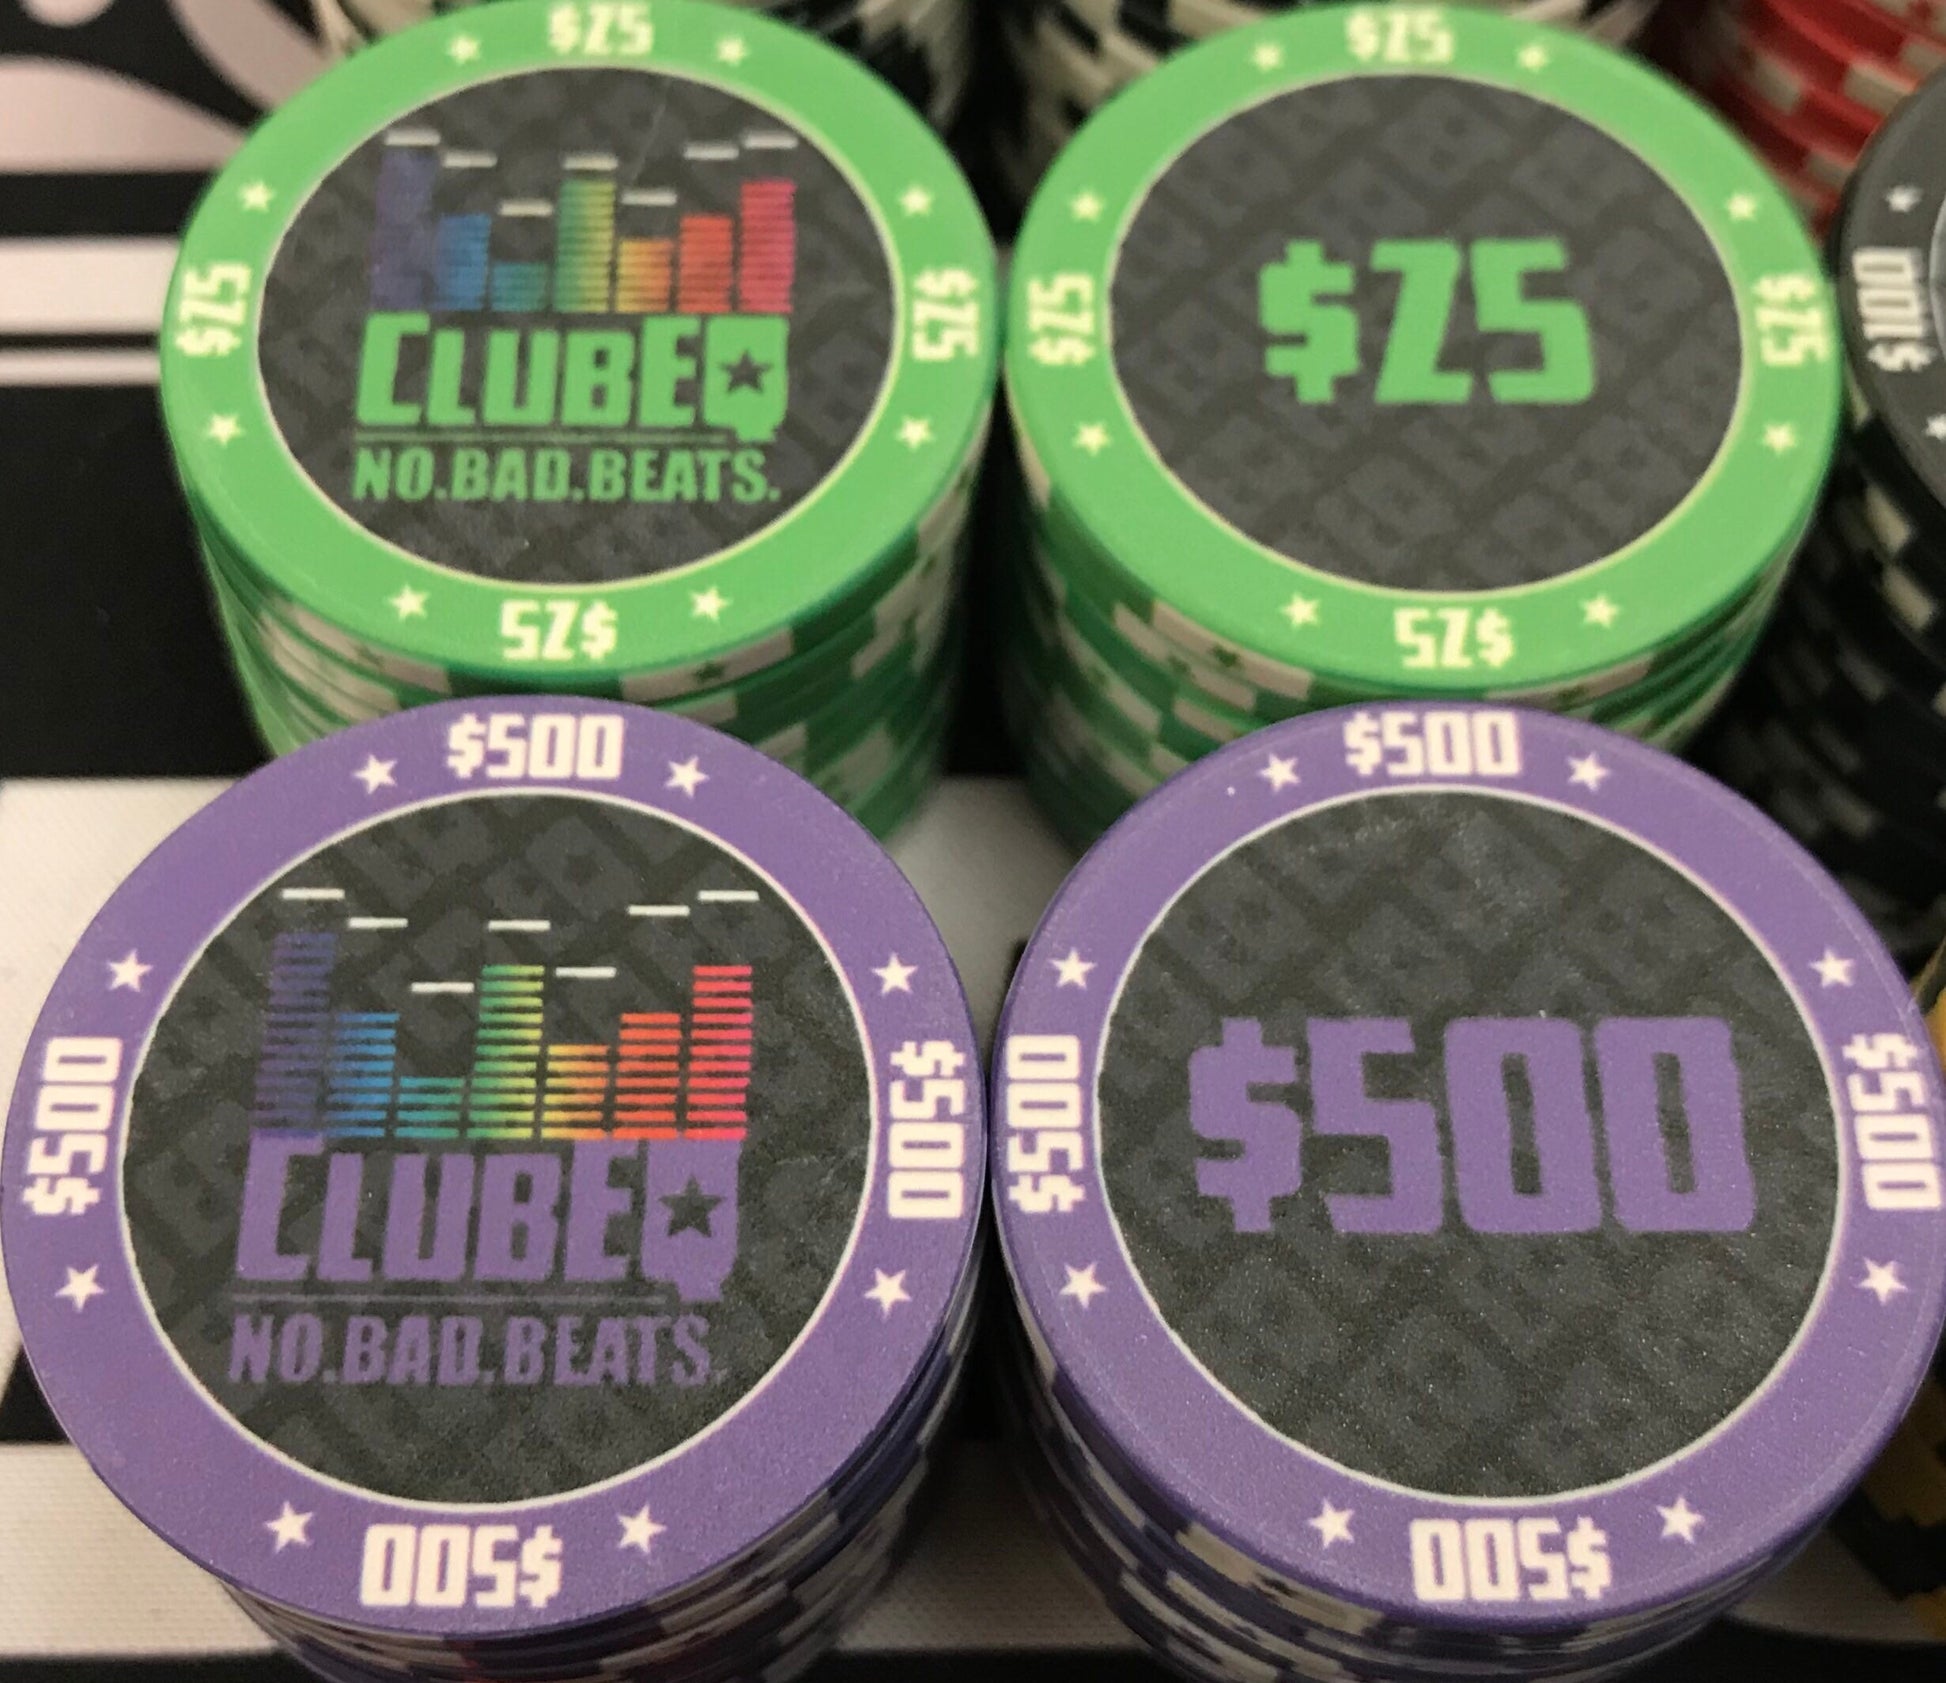 Here we see the twenty-five dollar ($25) and five-hundred dollar ($500) ClubEQ poker chips in lime green and purple, respectively. The ClubEQ logo resembles a lighted EQ band. On the other side of each chip is the denomination in the same color as the poker chip.